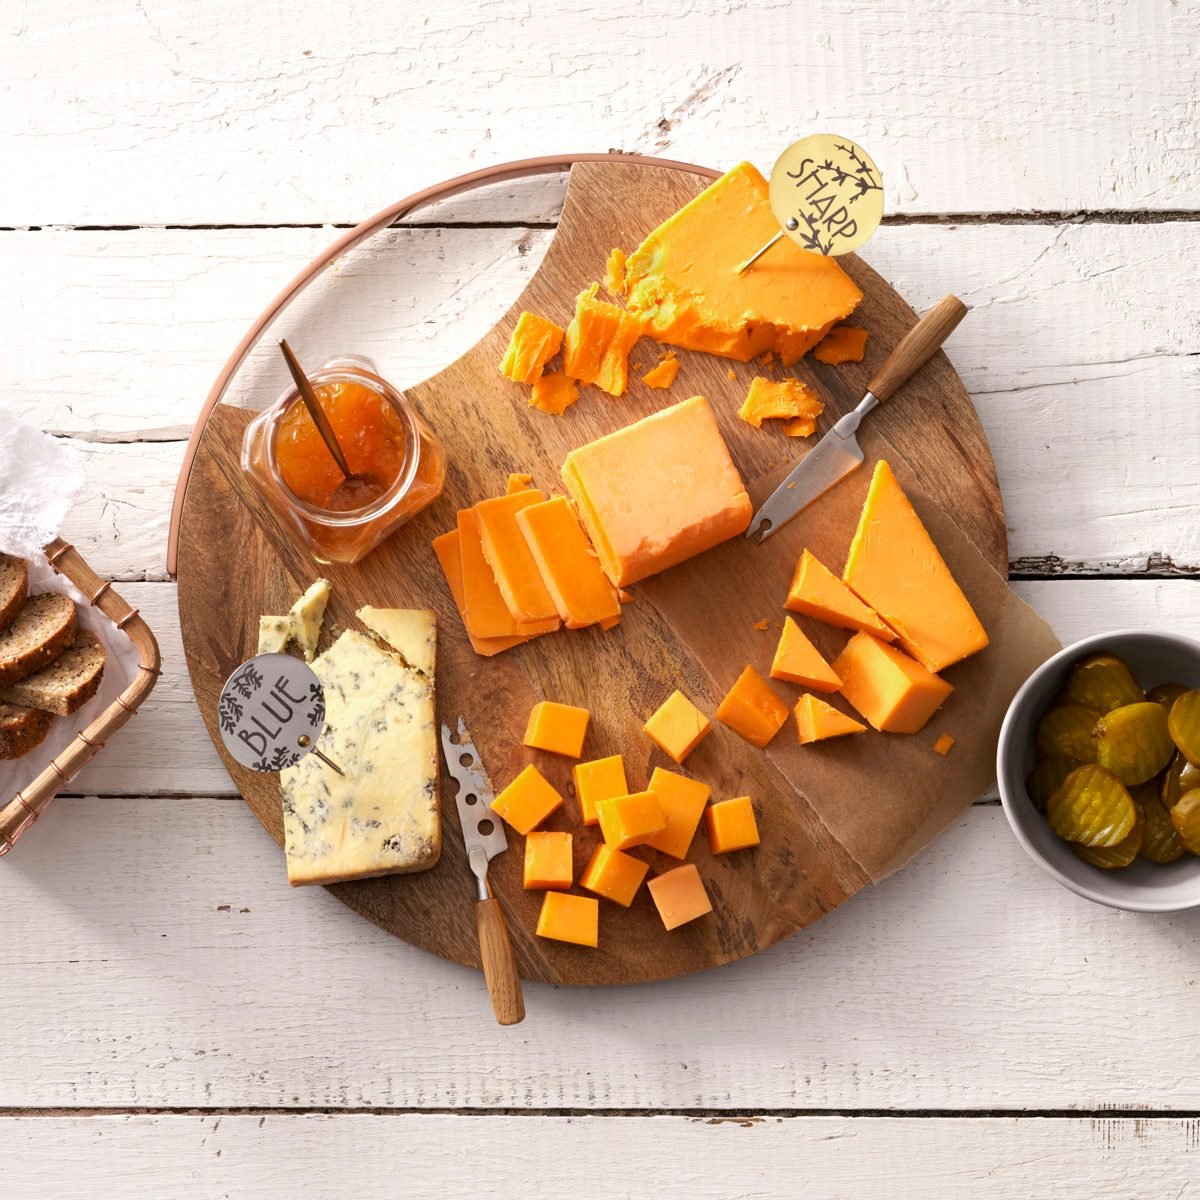 My Favorite Classic Cheese Board  Easy Sweet & Savory Cheese Board